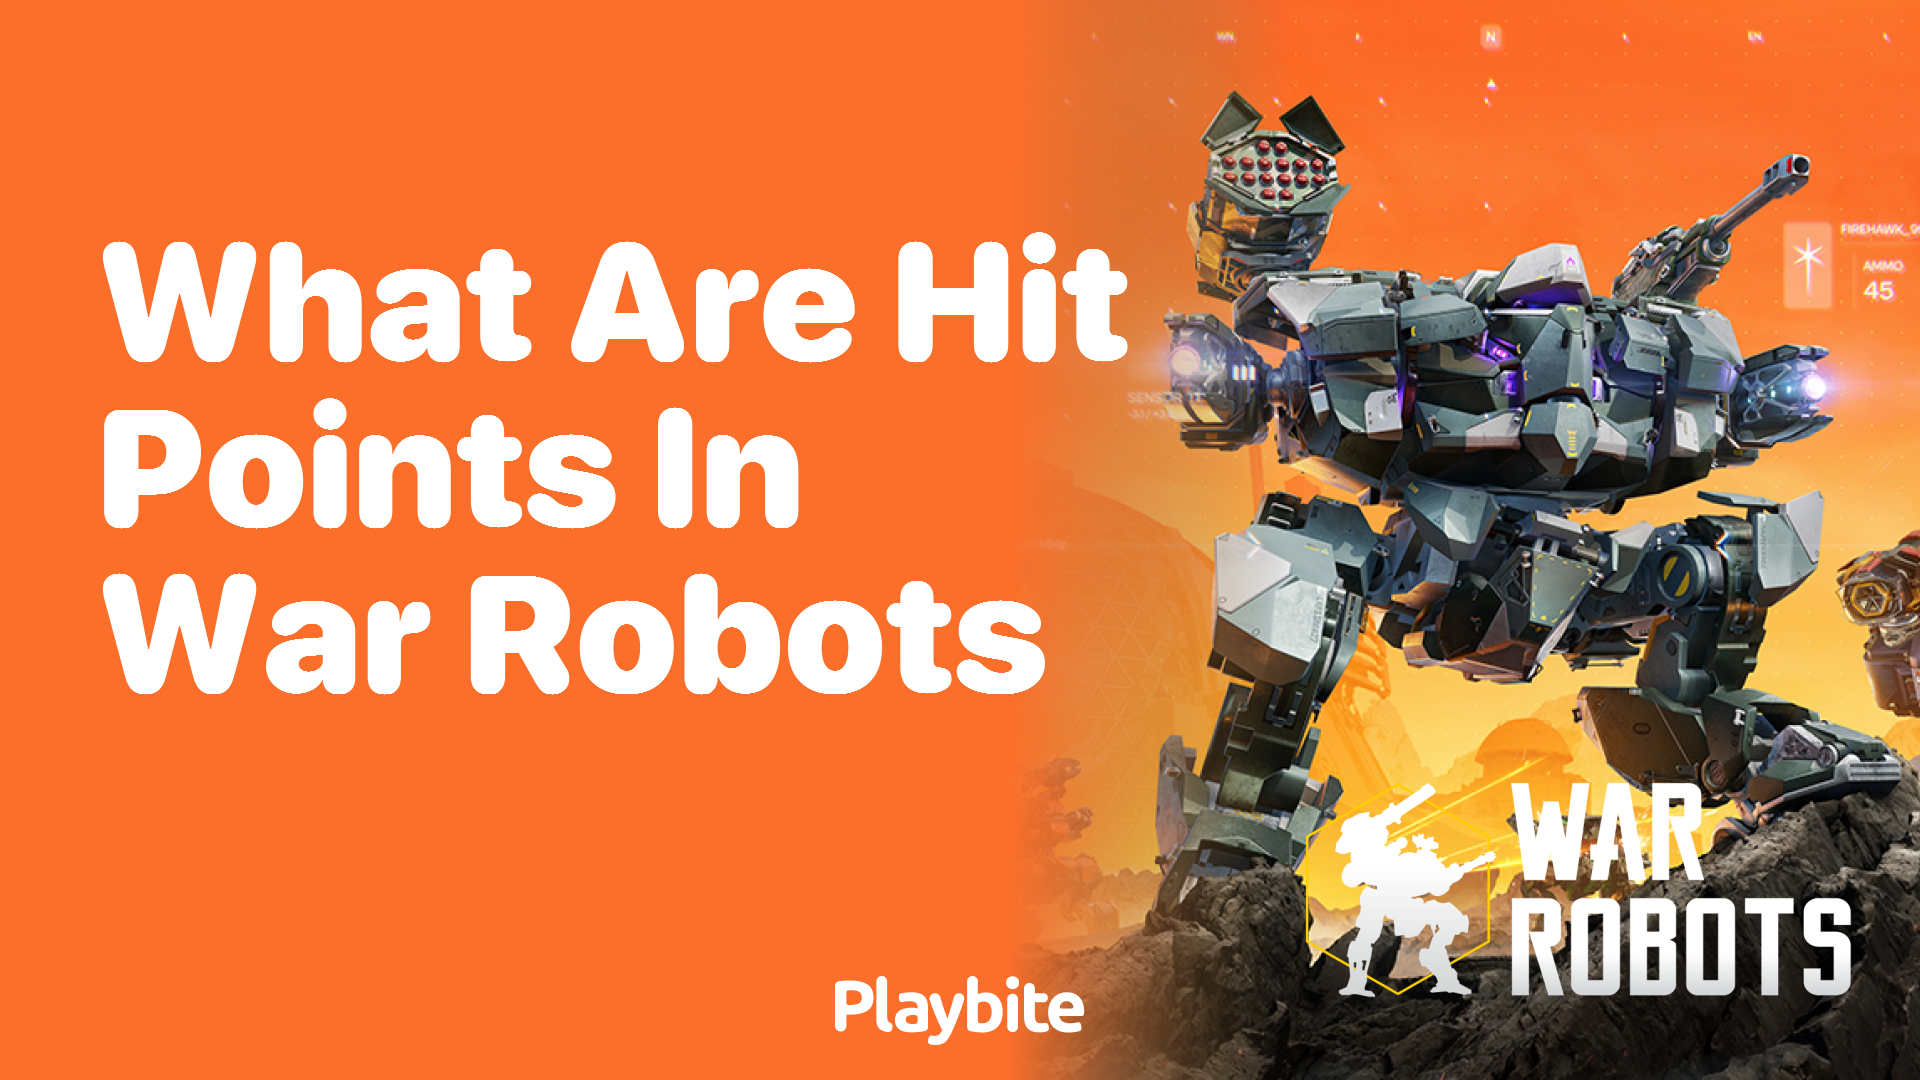 What Are Hit Points in War Robots?